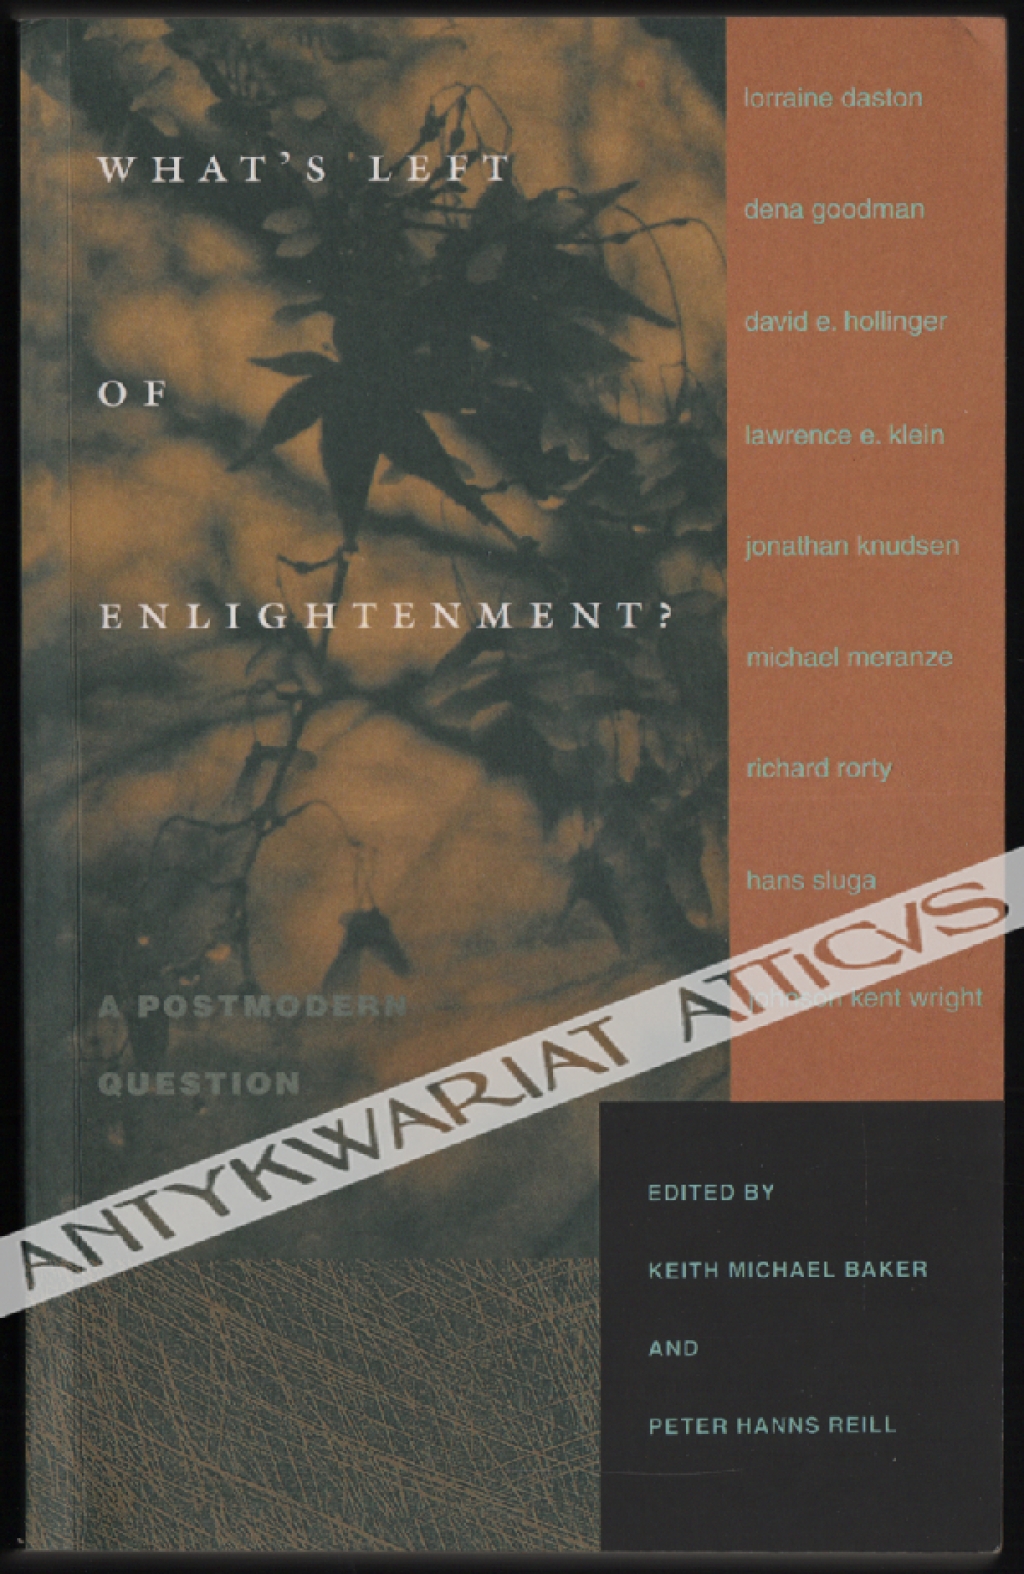 What's Left of Enlightenment? A Postmodern Question